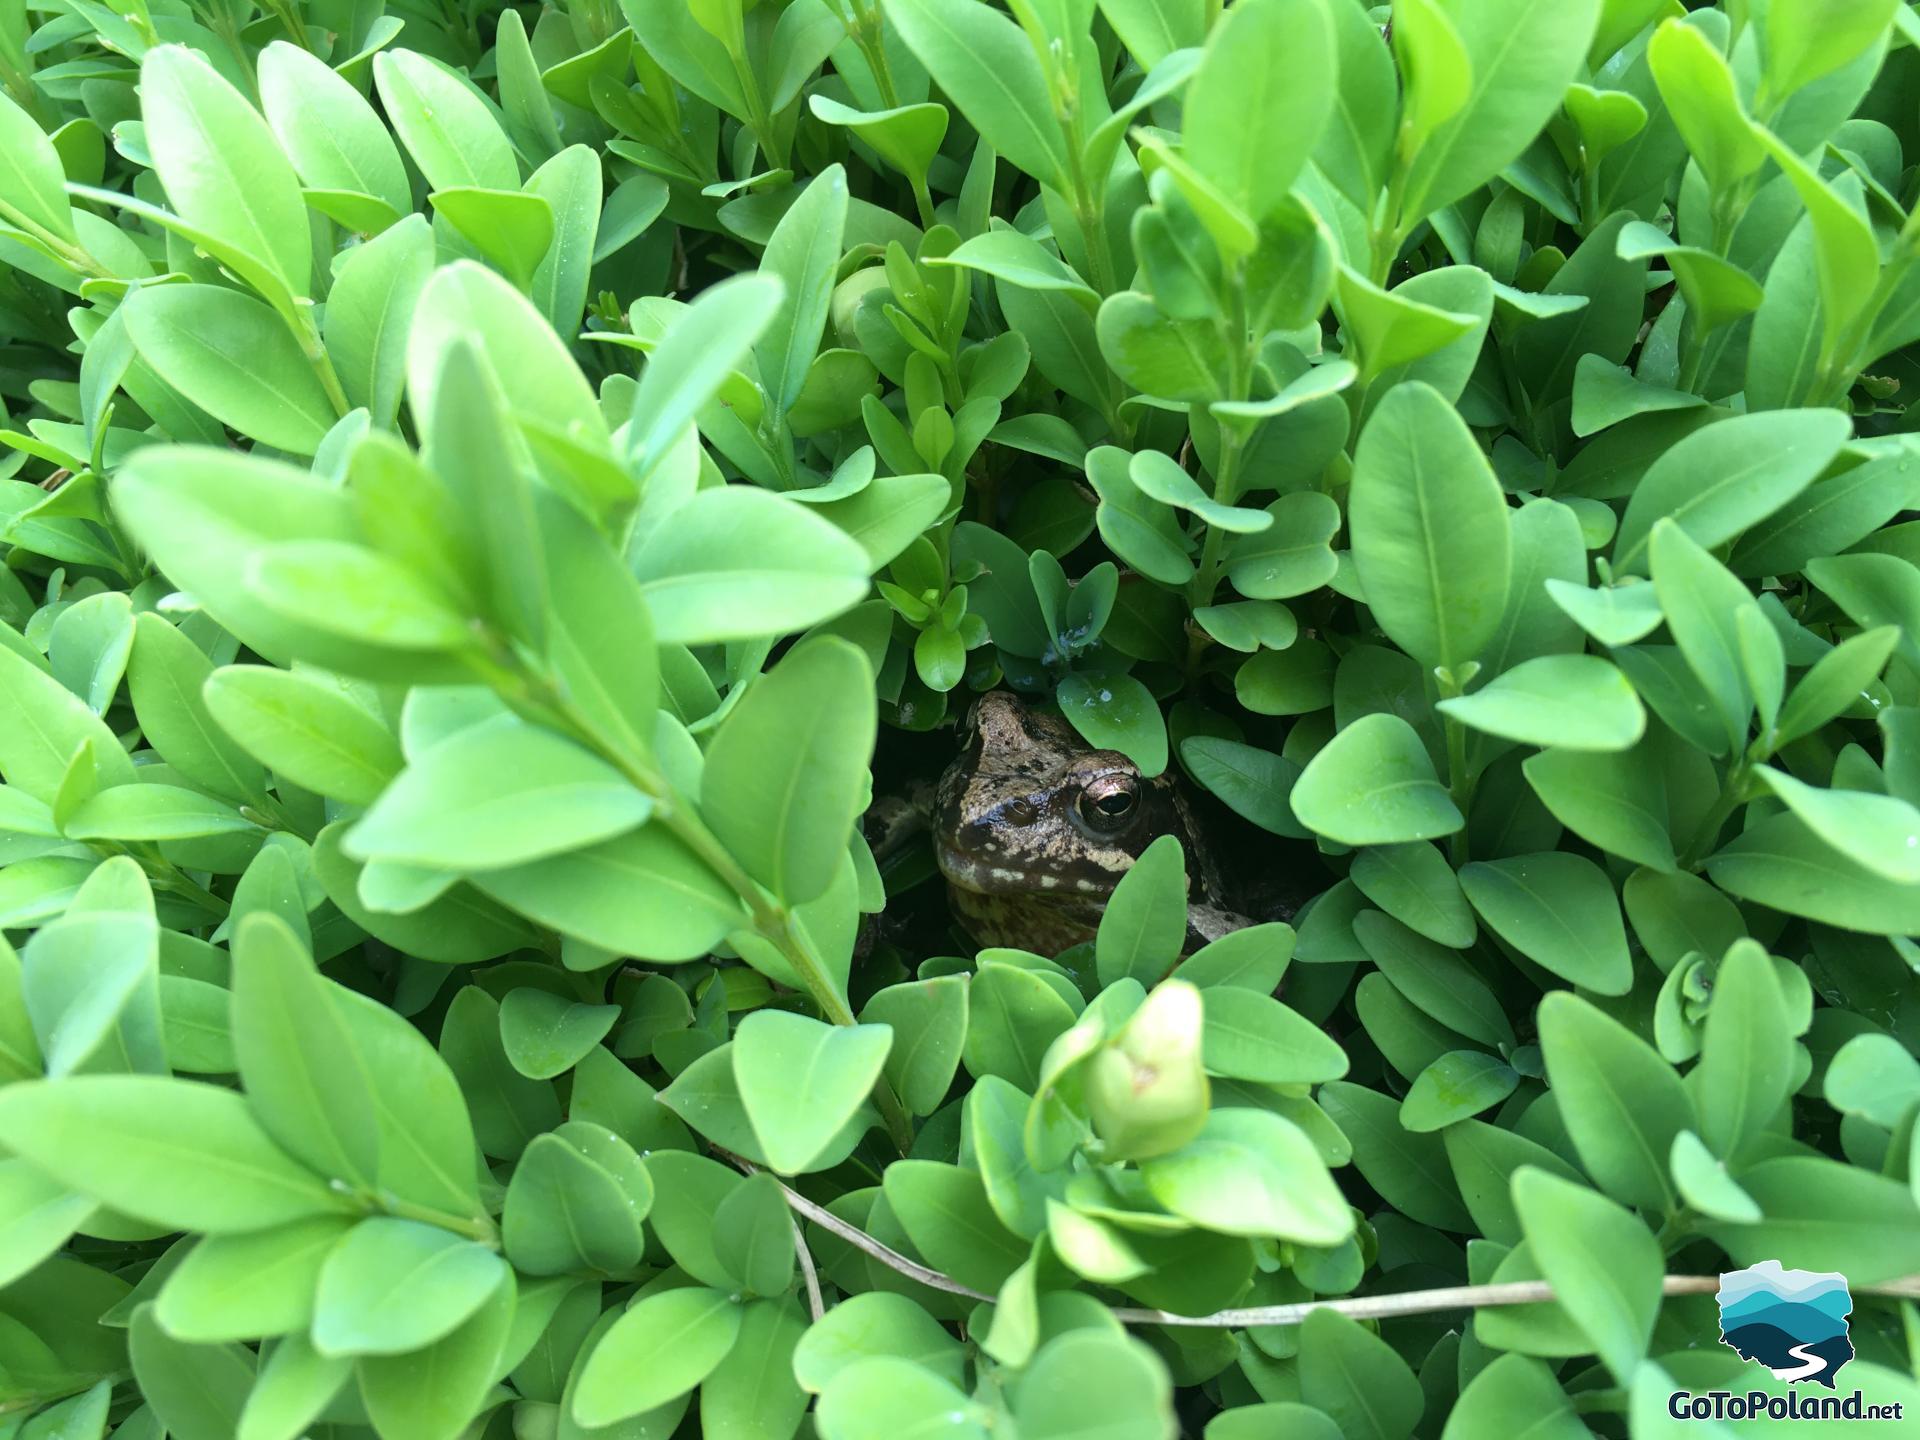 A small, speckled frog hiding among the green leaves